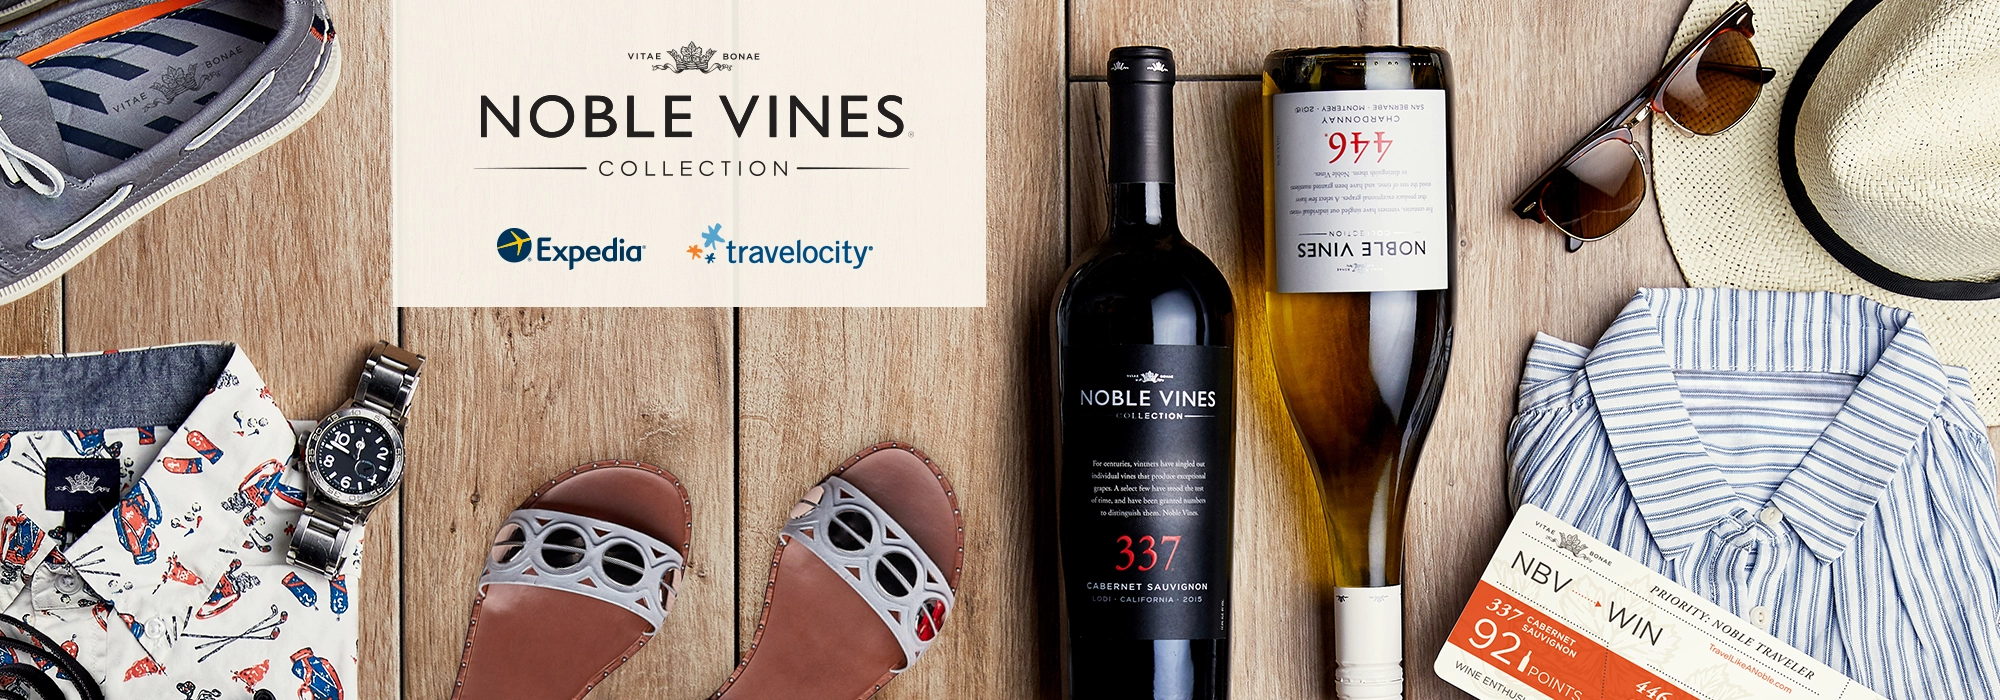 Noble Vines Well Traveled